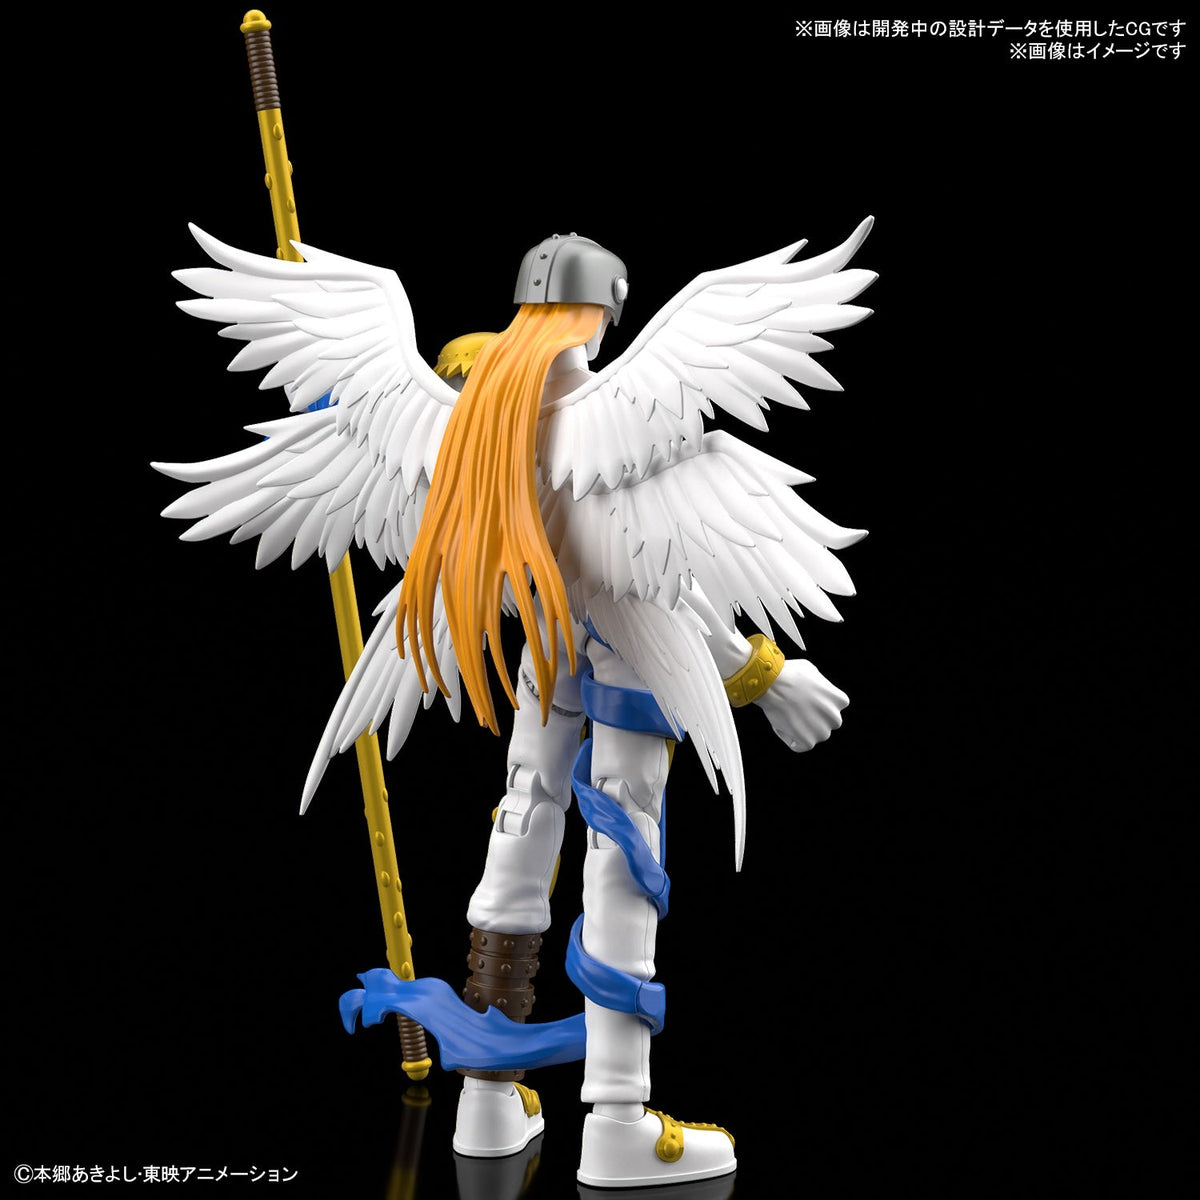 Digimon Figure-rise Standard Angemon-Bandai-Ace Cards &amp; Collectibles